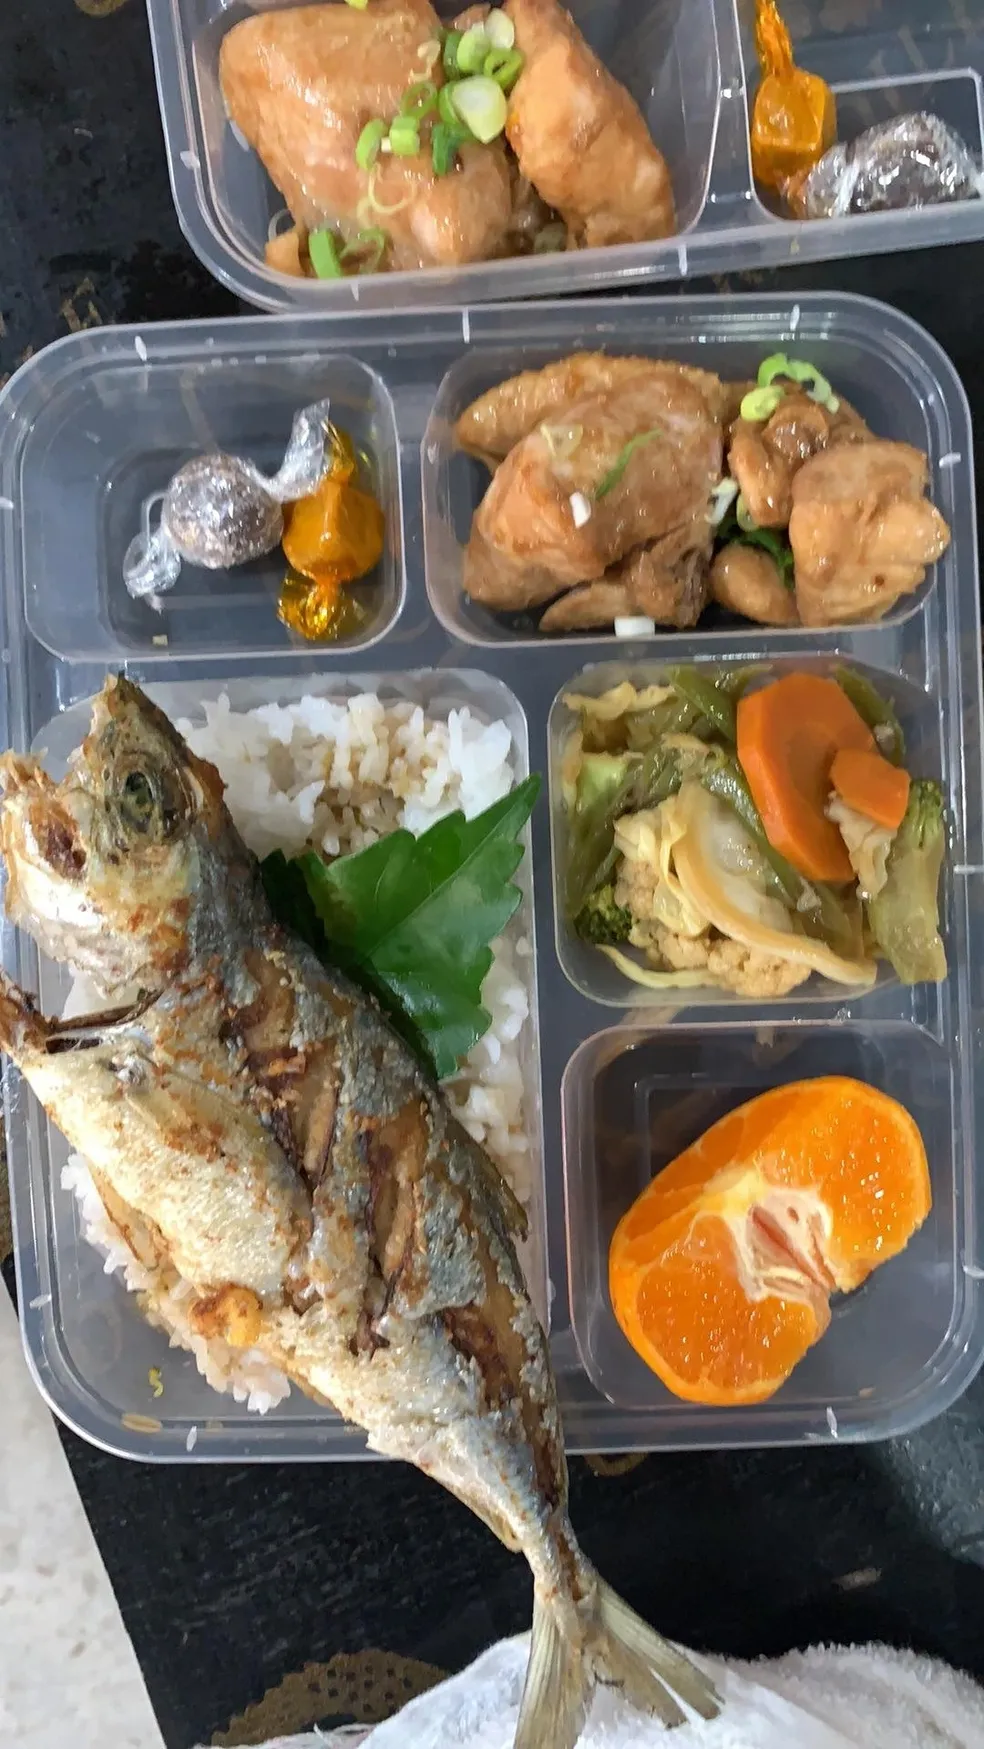 A tray of food with fish, rice and vegetables.